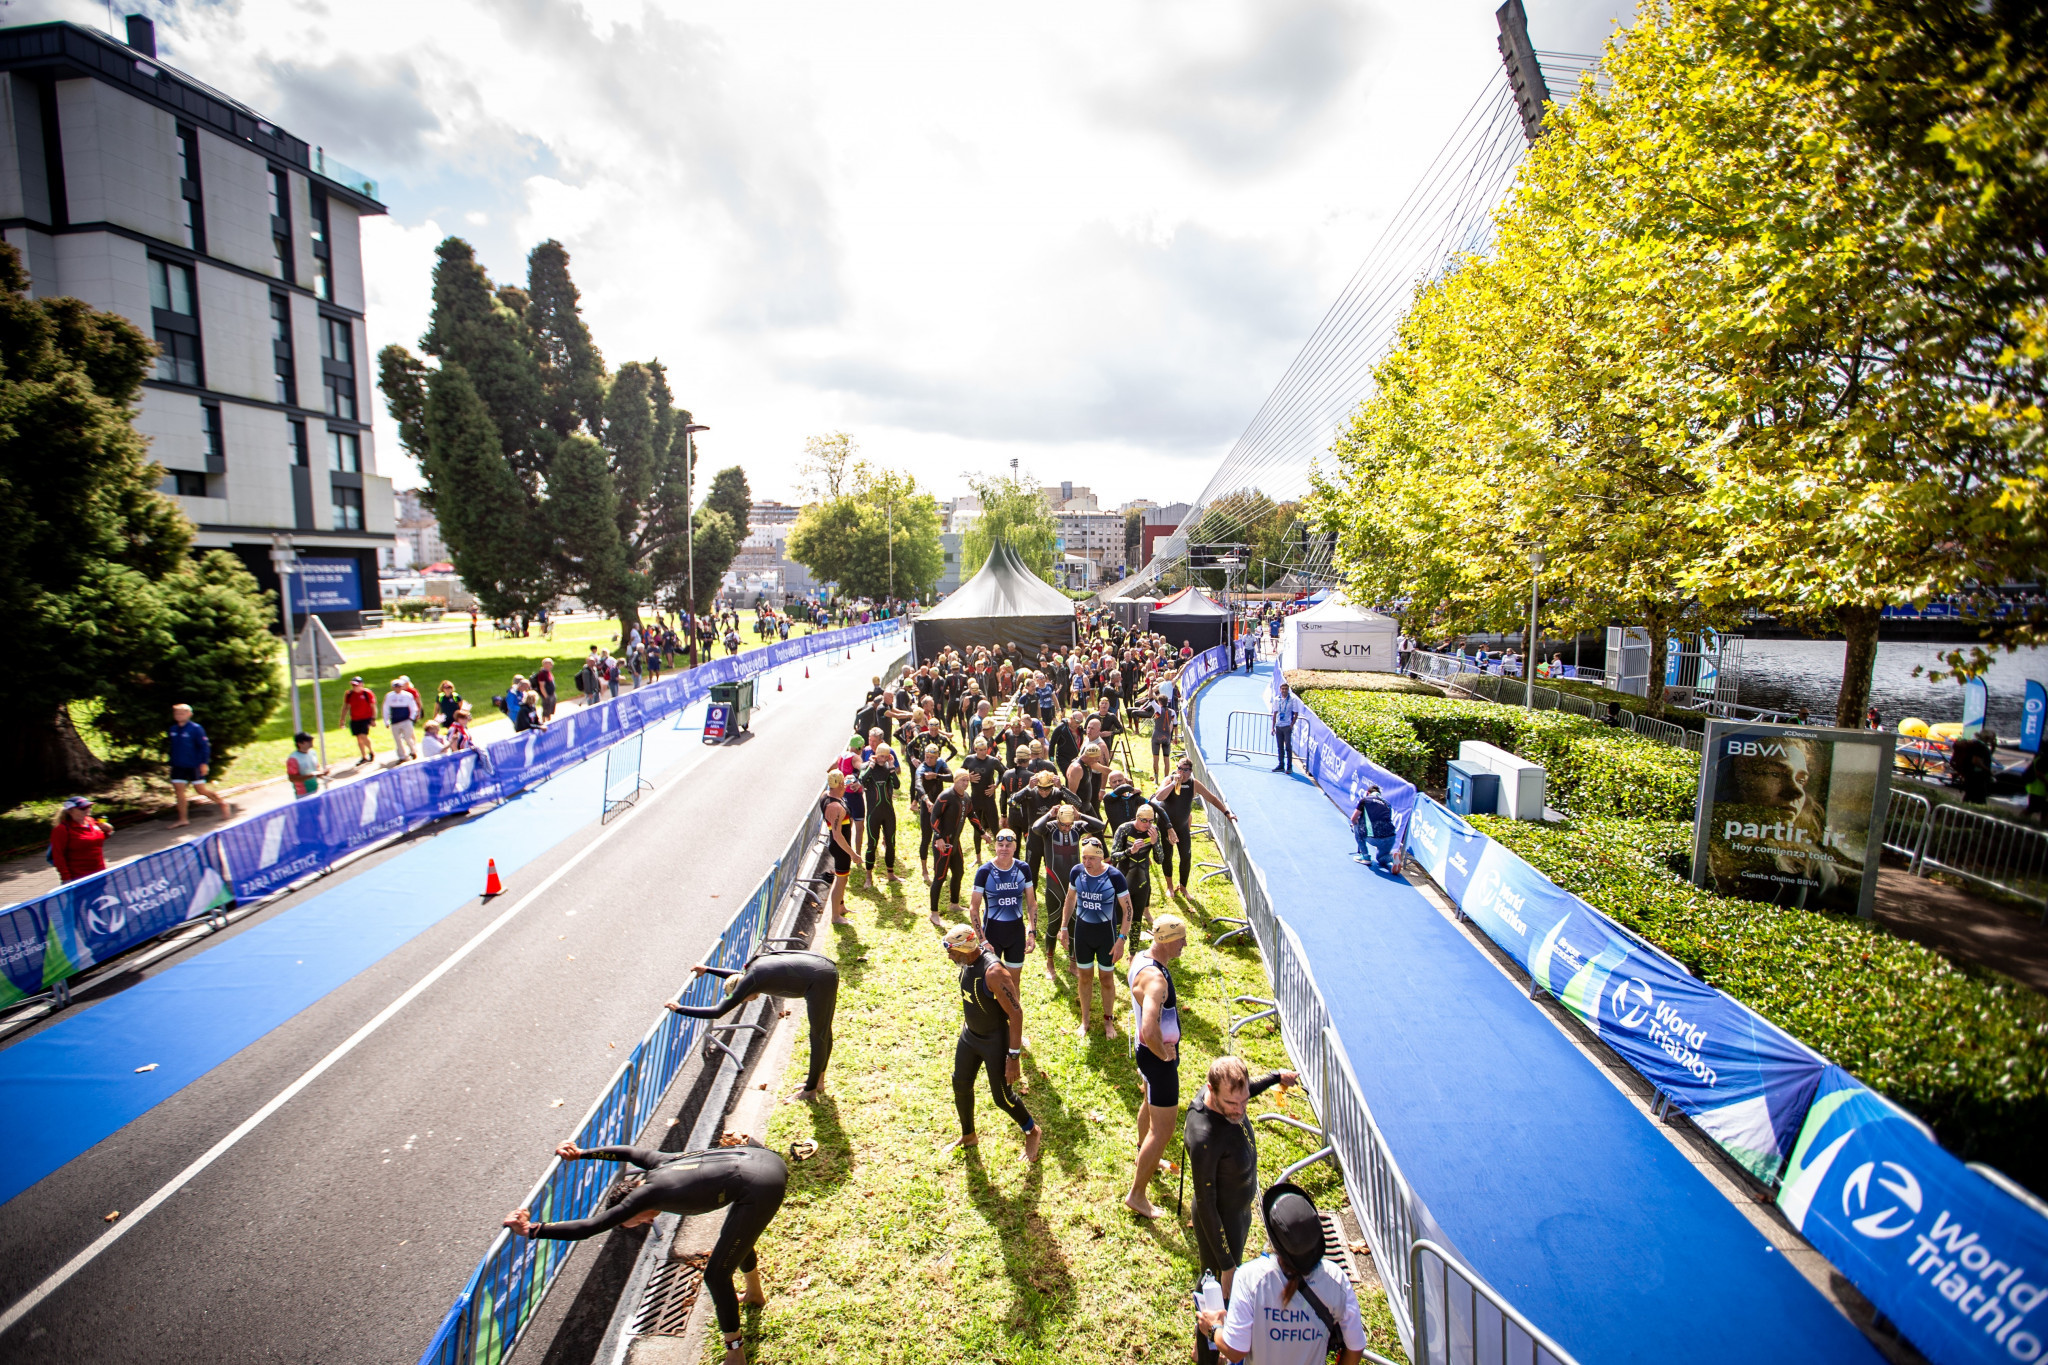 The first day of competition in Pontevedra featured the age-group super-sprint races ©World Triathlon